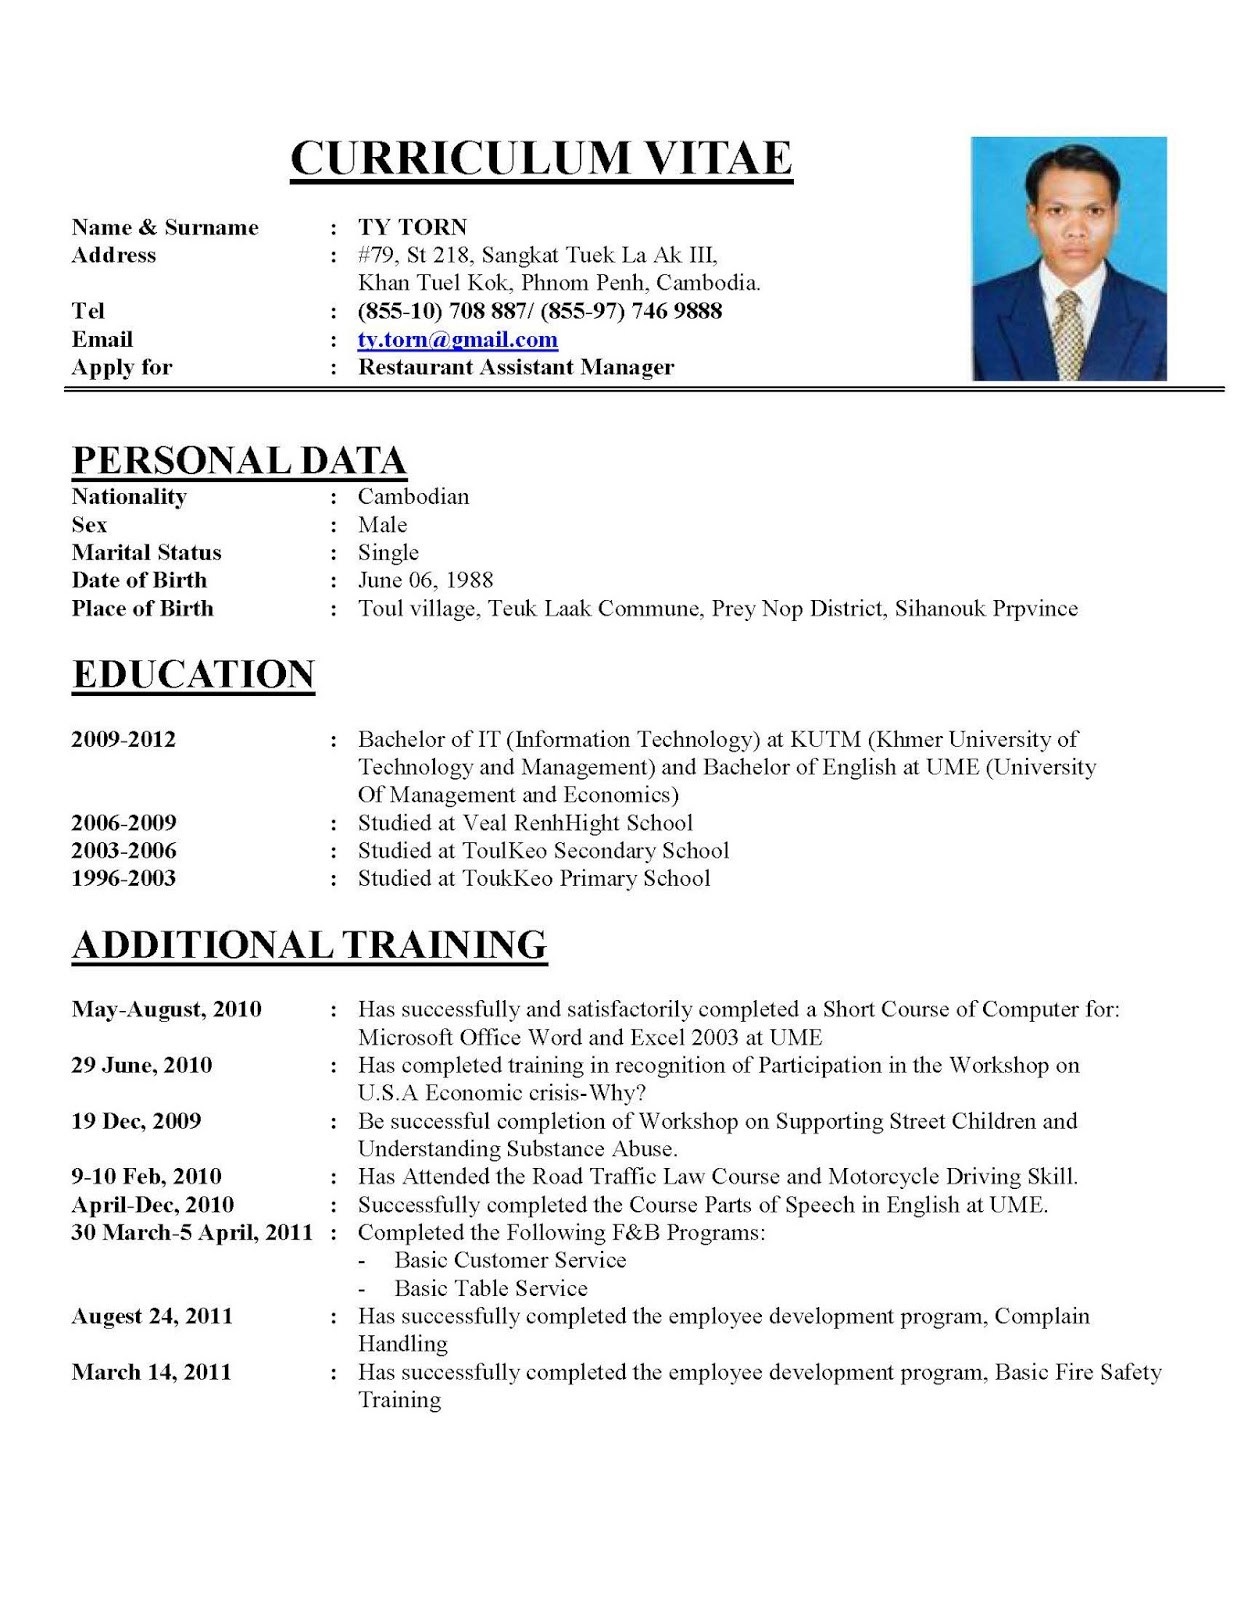 Resume Format 2018 Examples 